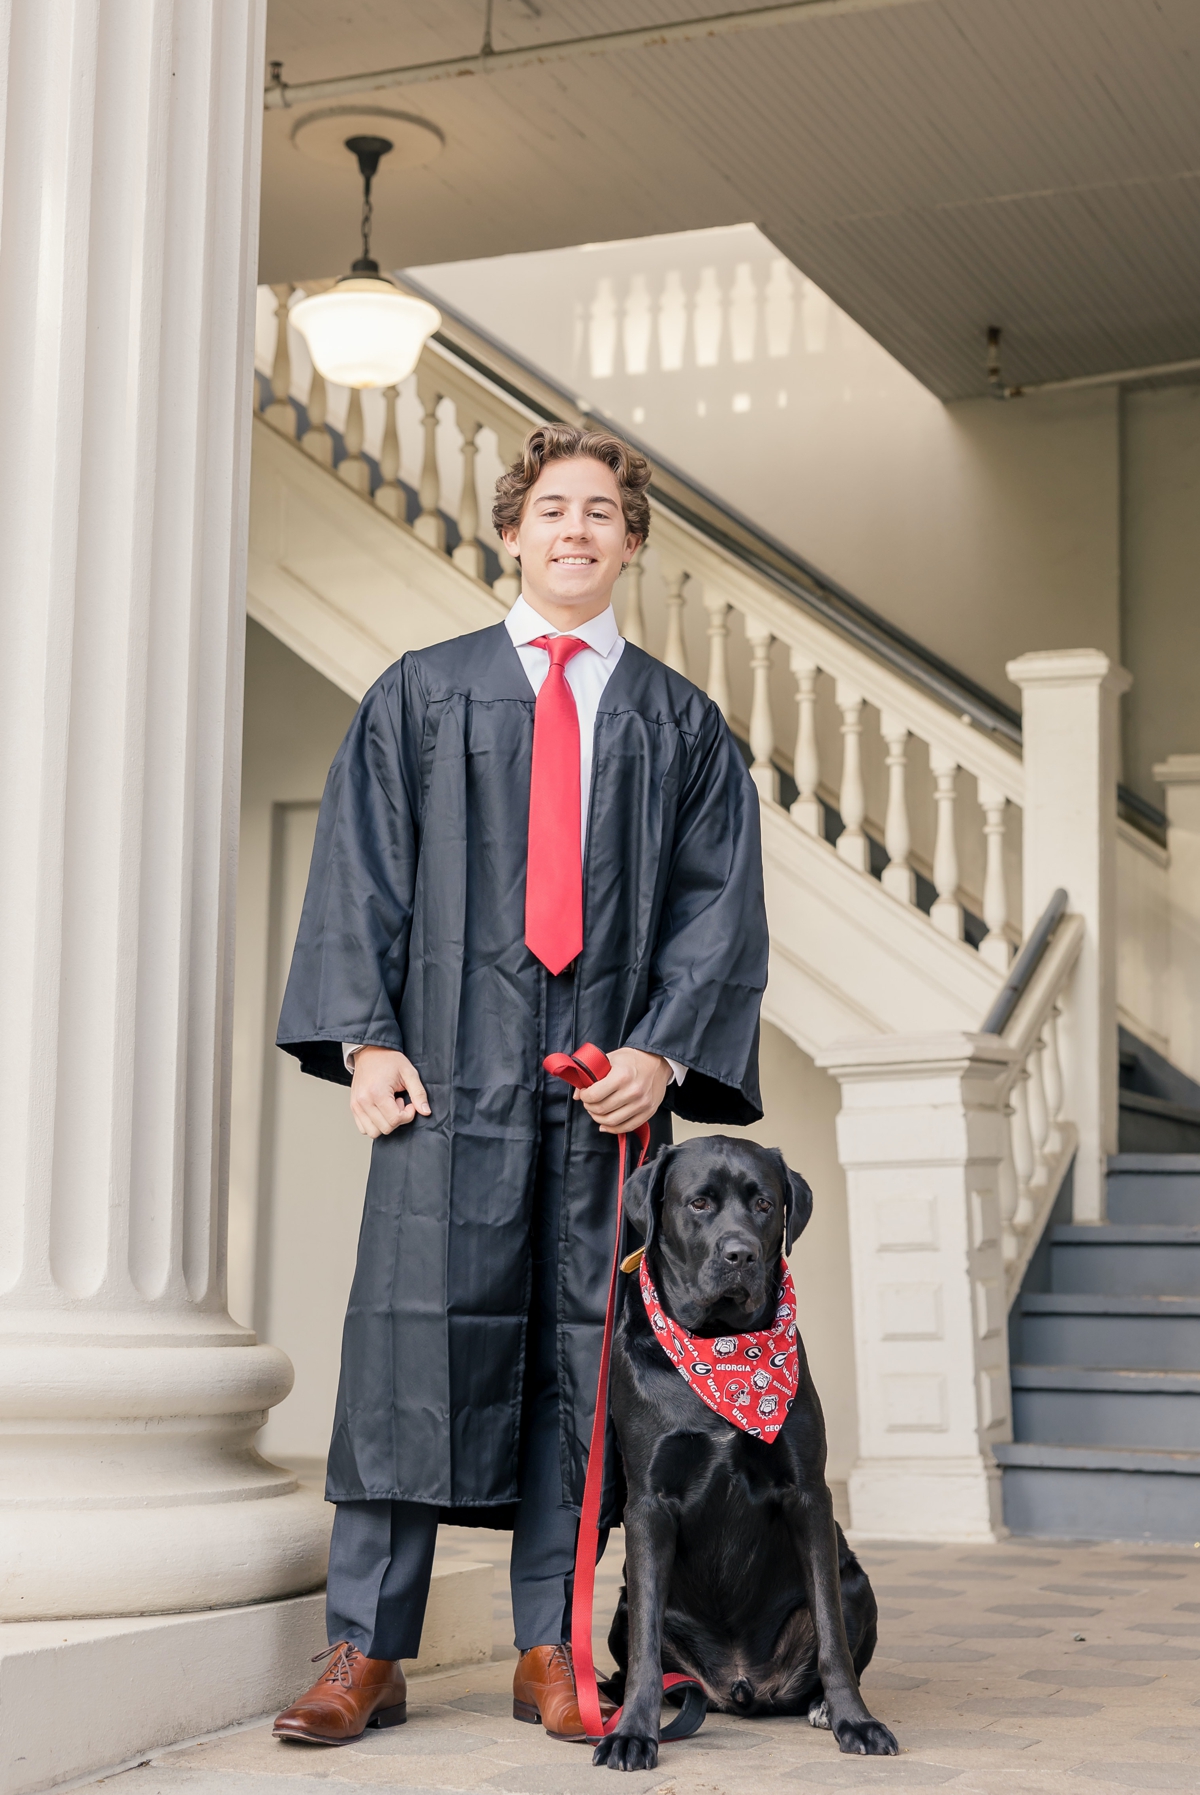 A UGA grad smiling in his graduation gown in front of marble stone steps holding his dog's leash.